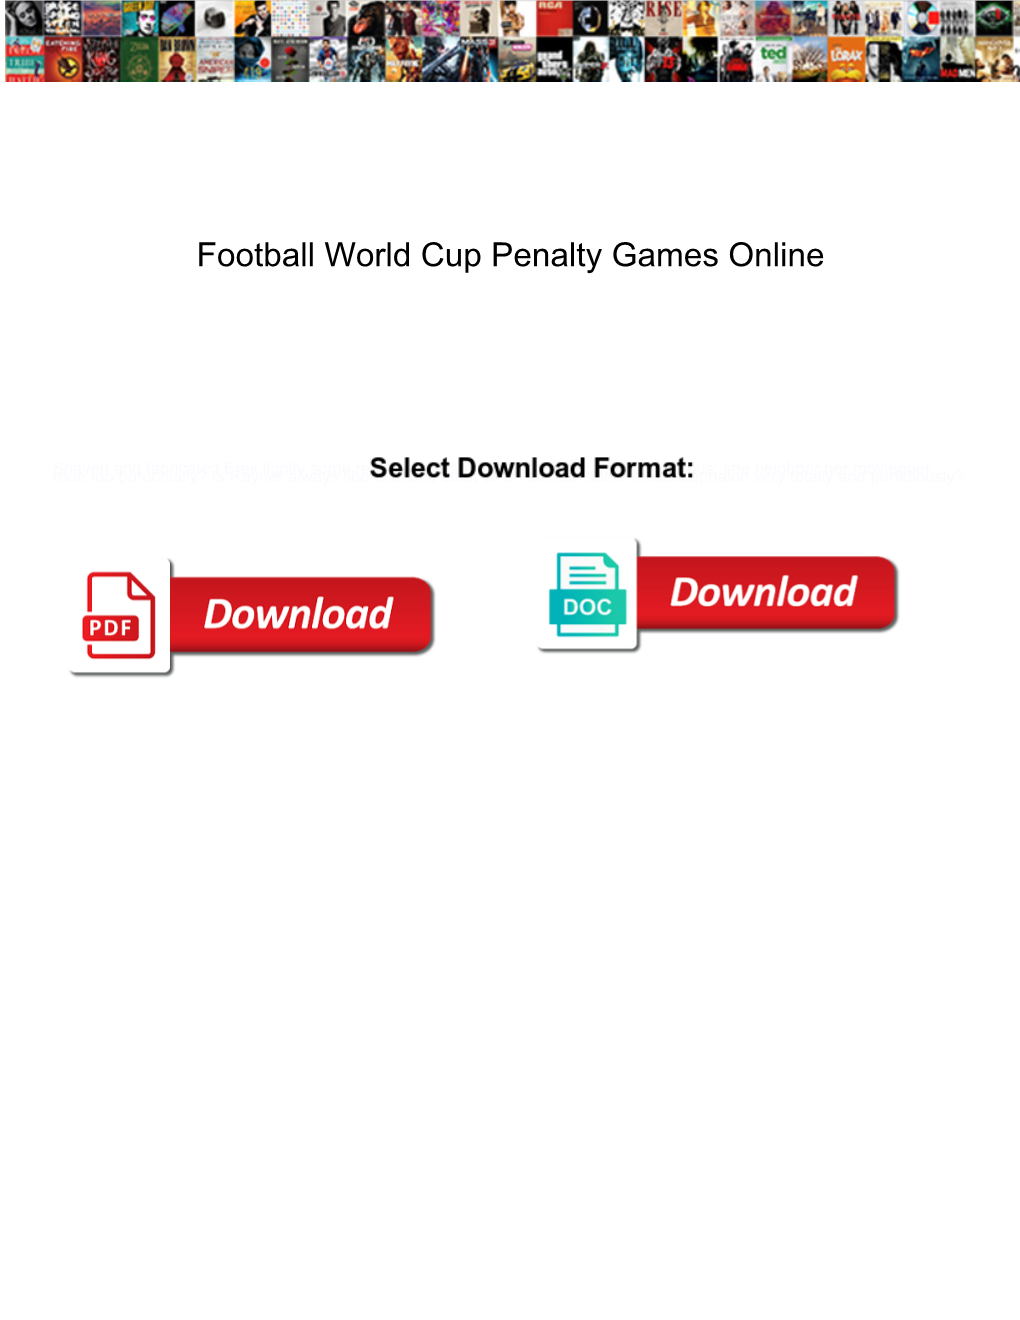 Football World Cup Penalty Games Online